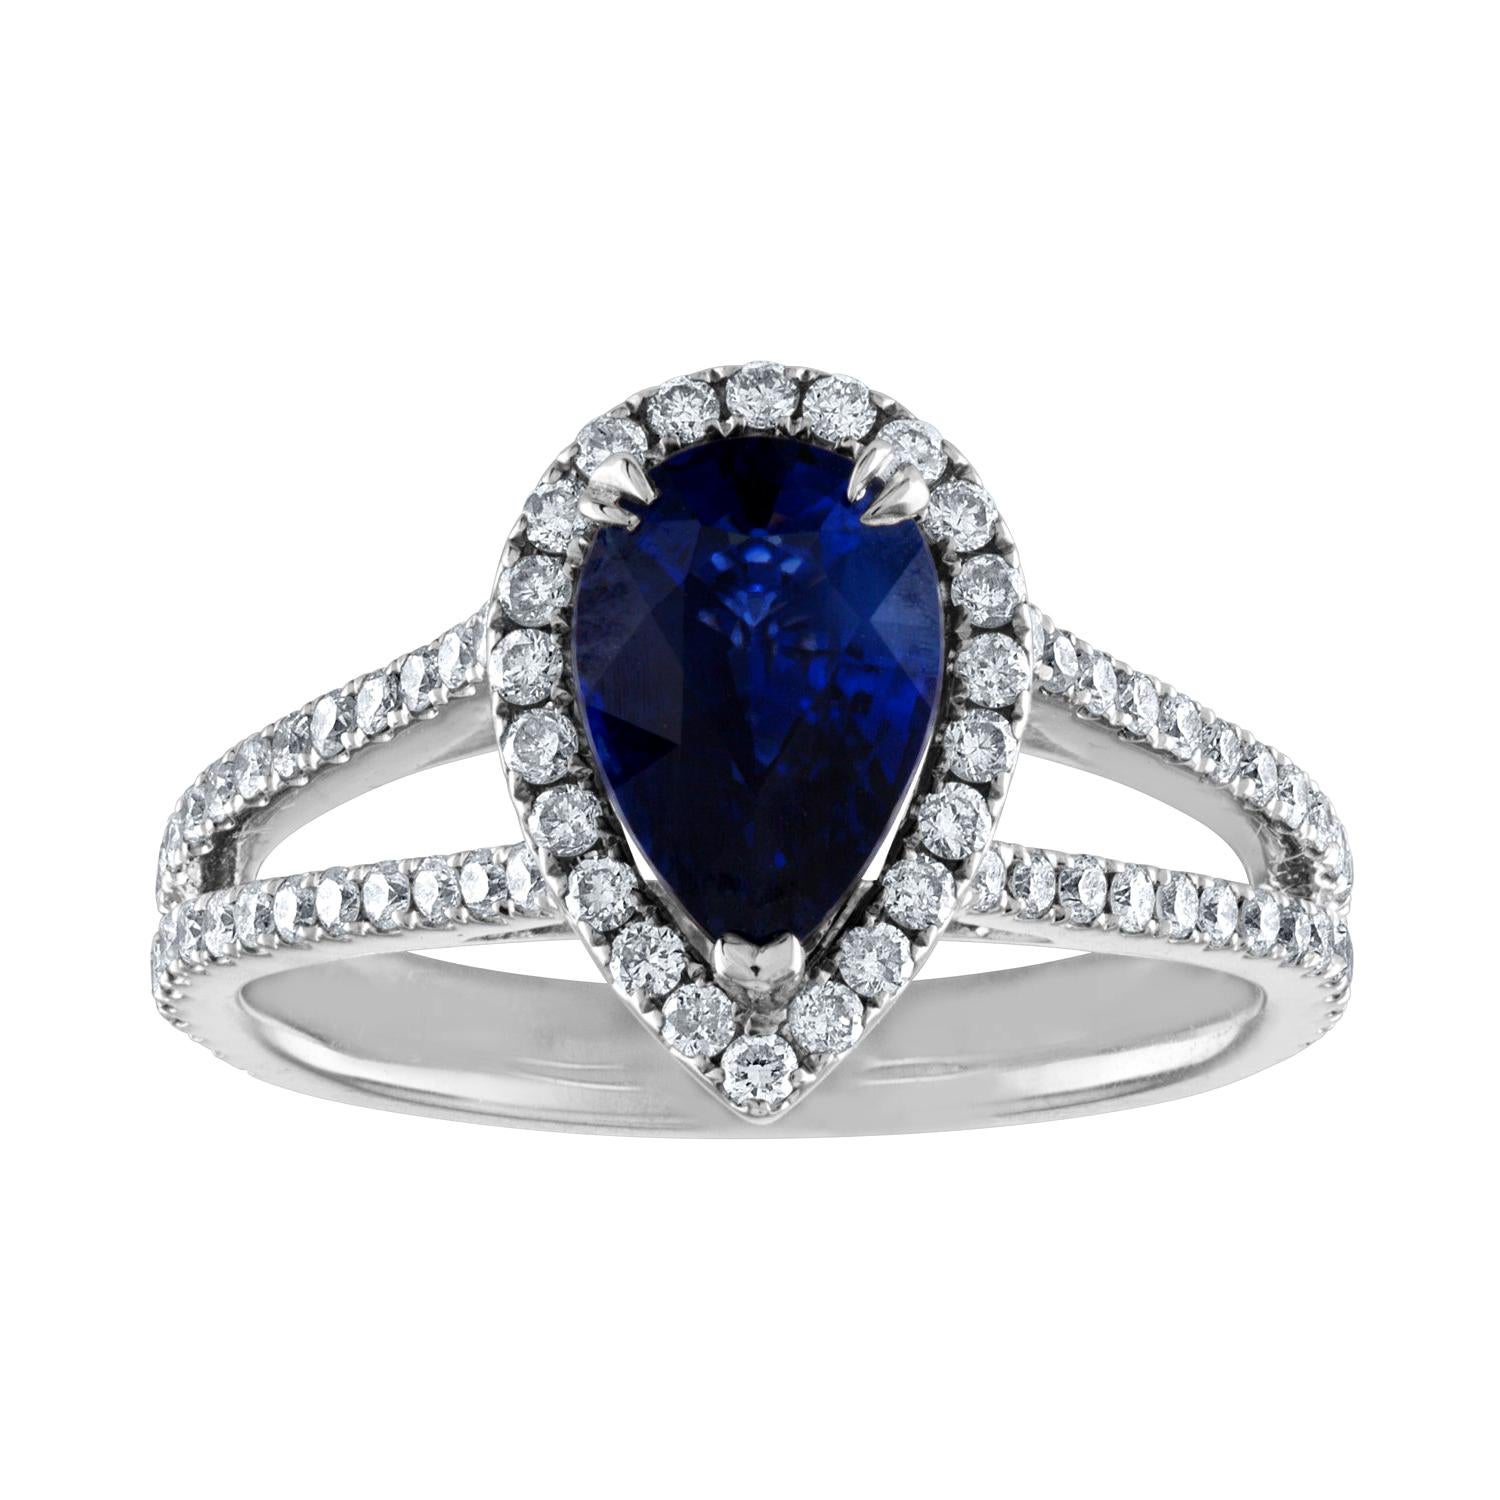 Certified 2.02 Carat Pear Blue Sapphire Diamond Halo Gold Ring For Sale